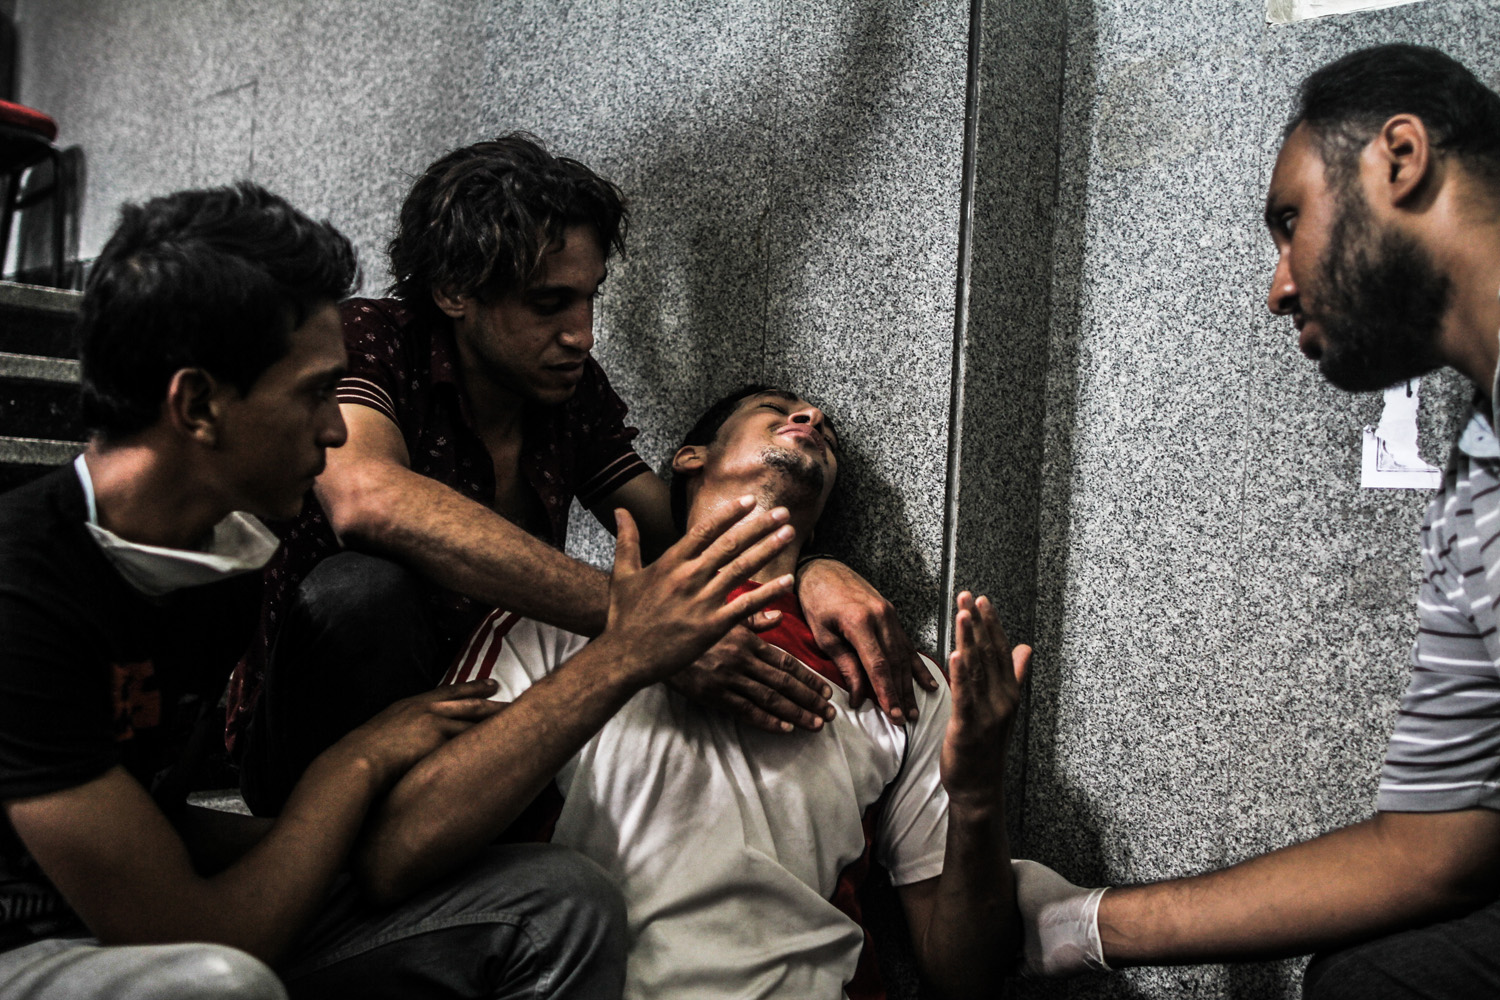 A brother of one of the victims is comforted by friends outside the room being used as a makeshift morgue.